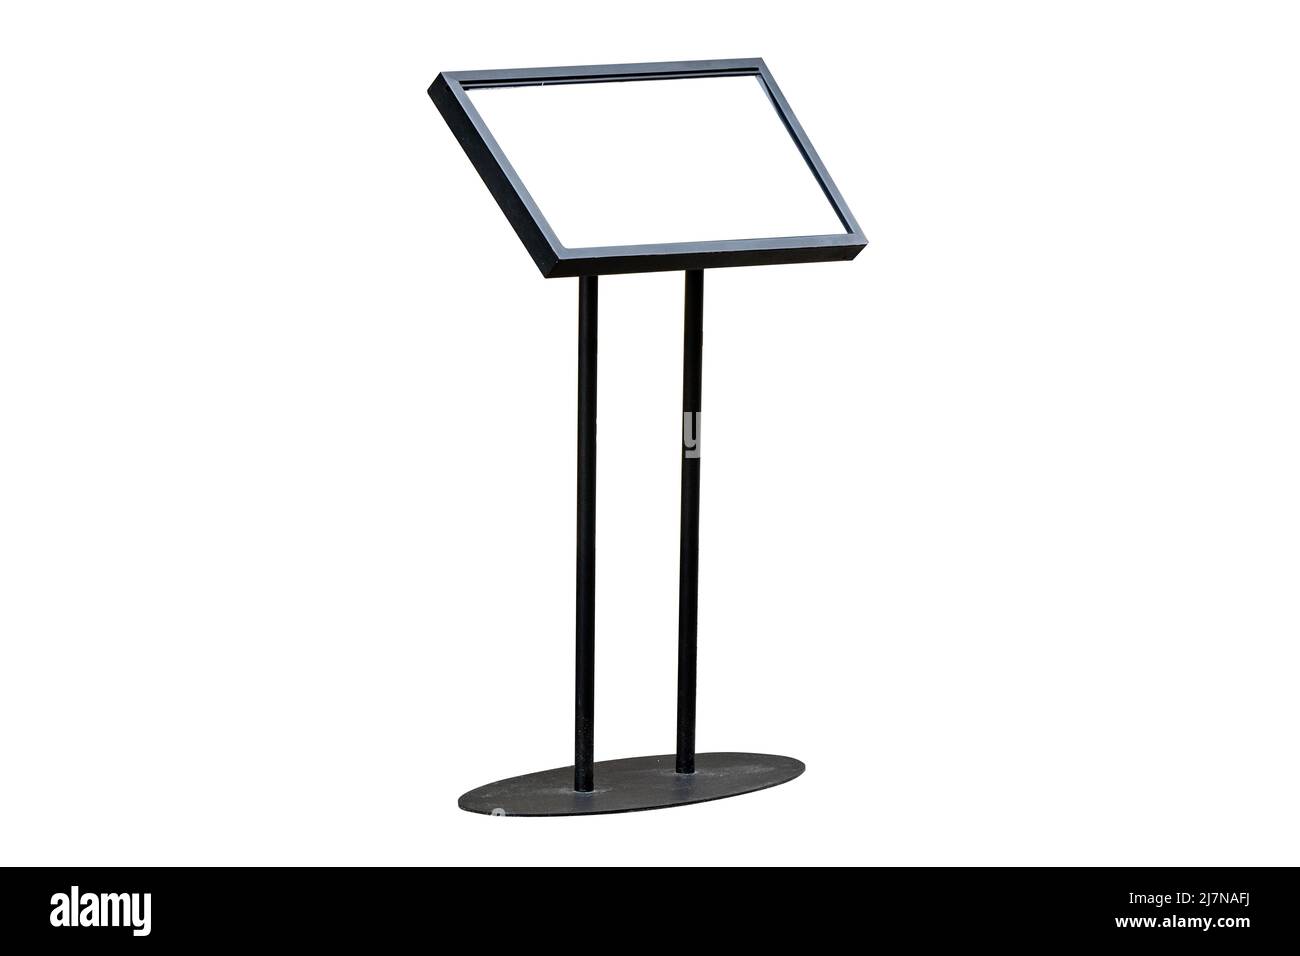 Outdoor metal restaurant menu stand with copy space and isolated. Stock Photo